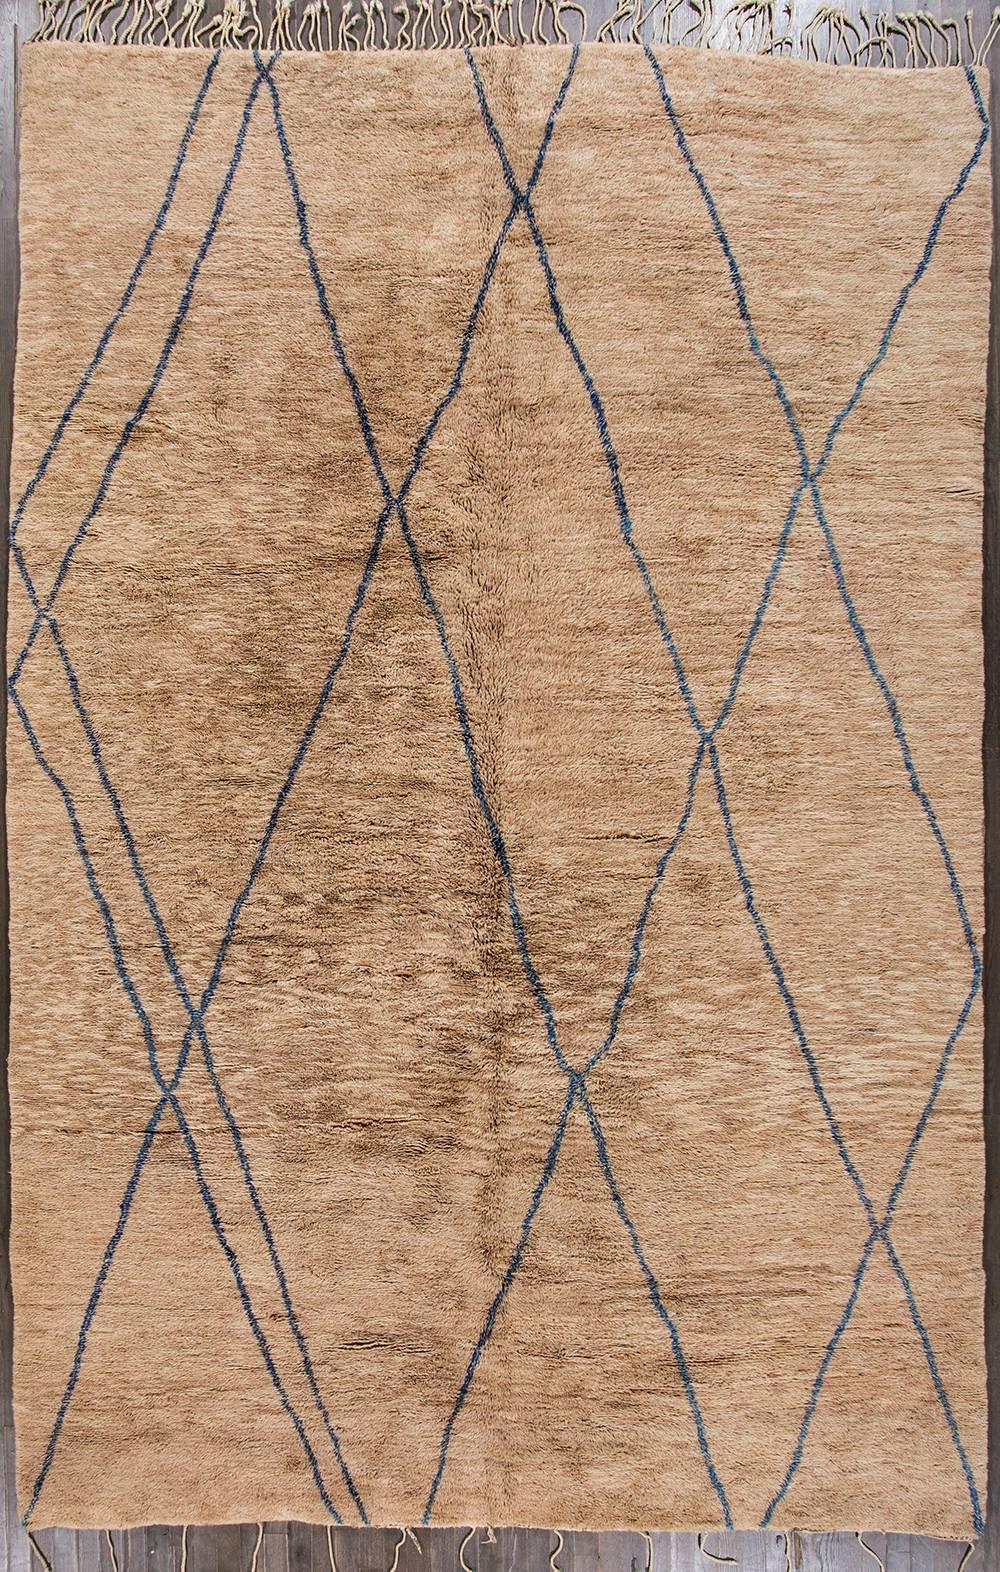 Modern Moroccan rug with a brown field and dark blue design. Measures approximately 11 feet by 16 feet 6 inches.